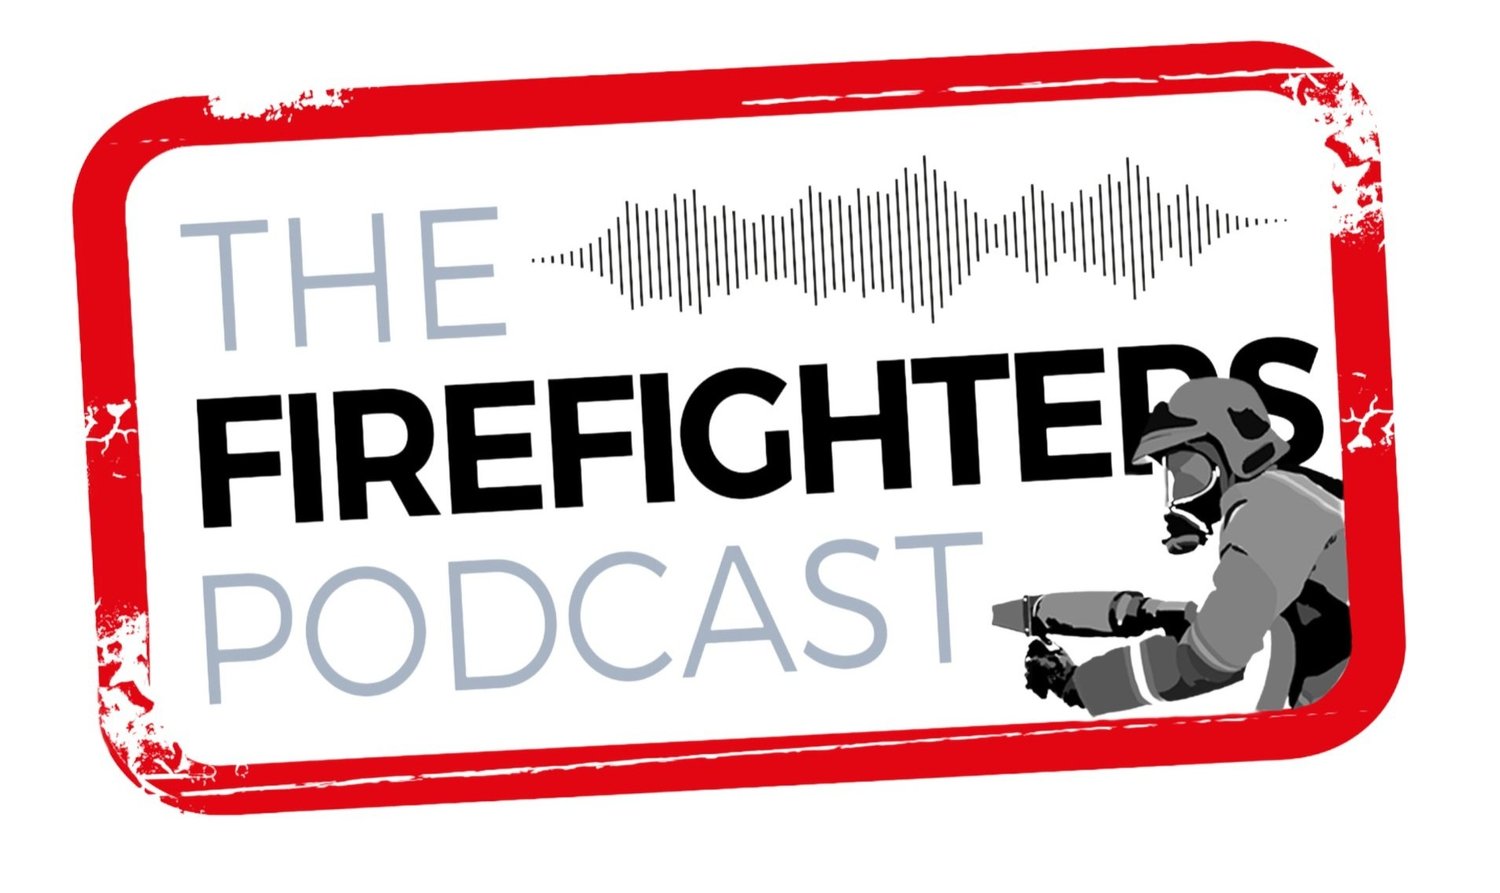 The Firefighters Podcast